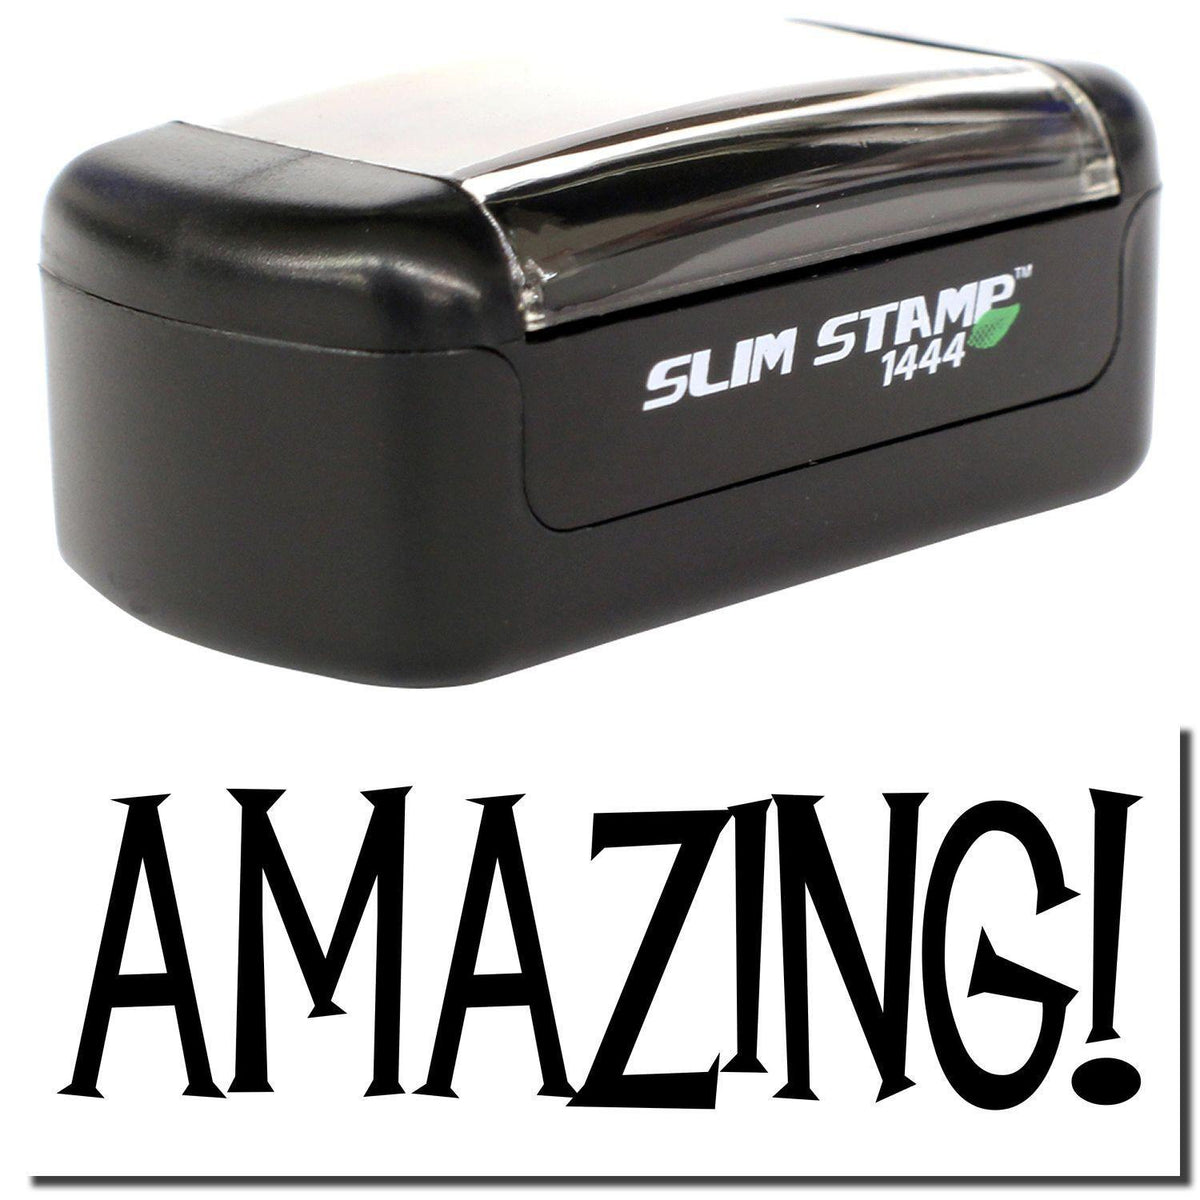 A stock office pre-inked stamp with a stamped image showing how the text &quot;AMAZING!&quot; is displayed after stamping.